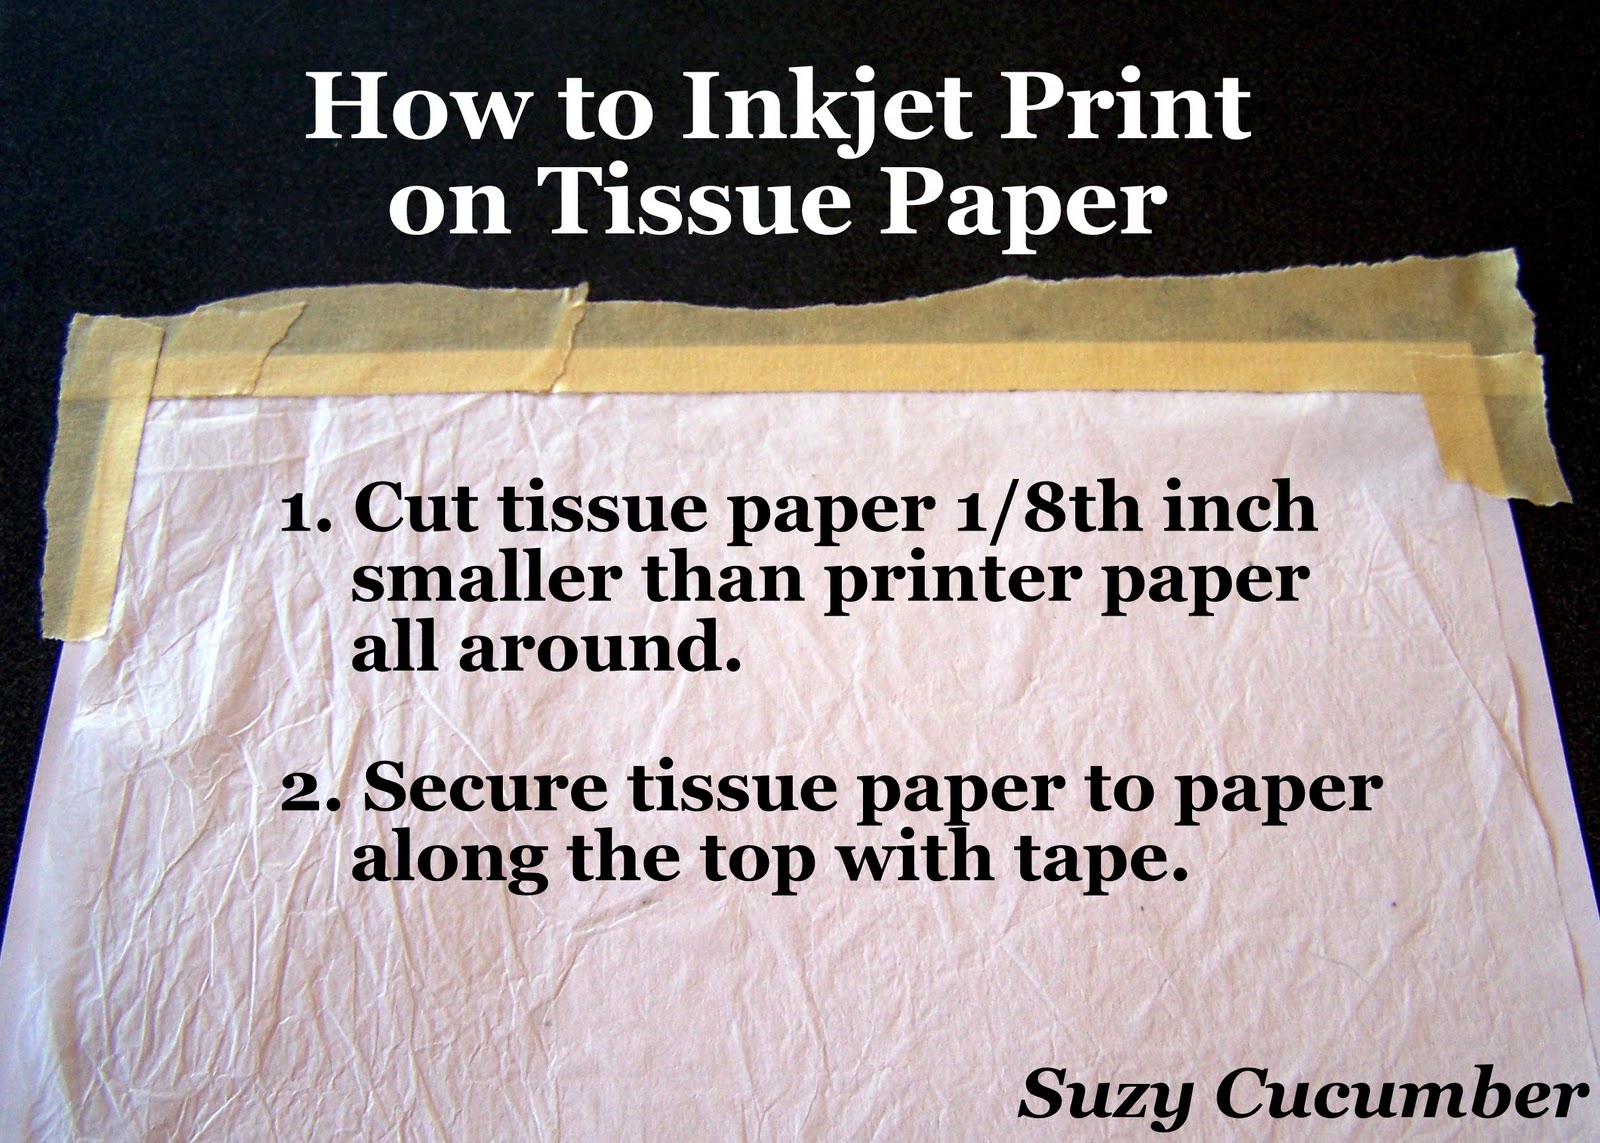 Suzy Cucumber: How to Inkjet Print on Tissue Paper